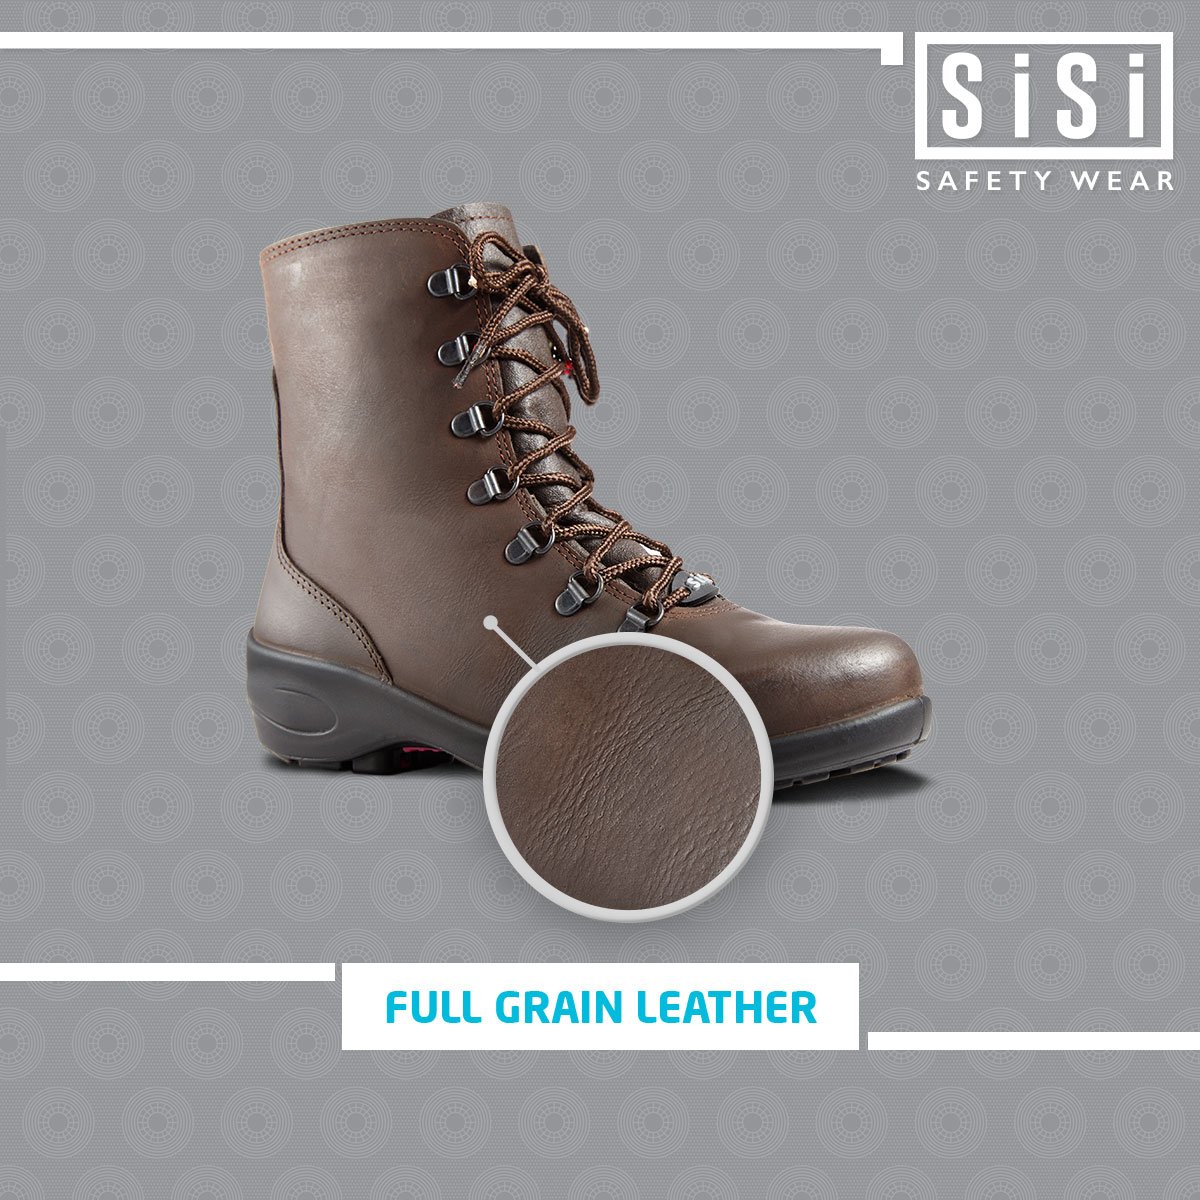 sisi safety boots